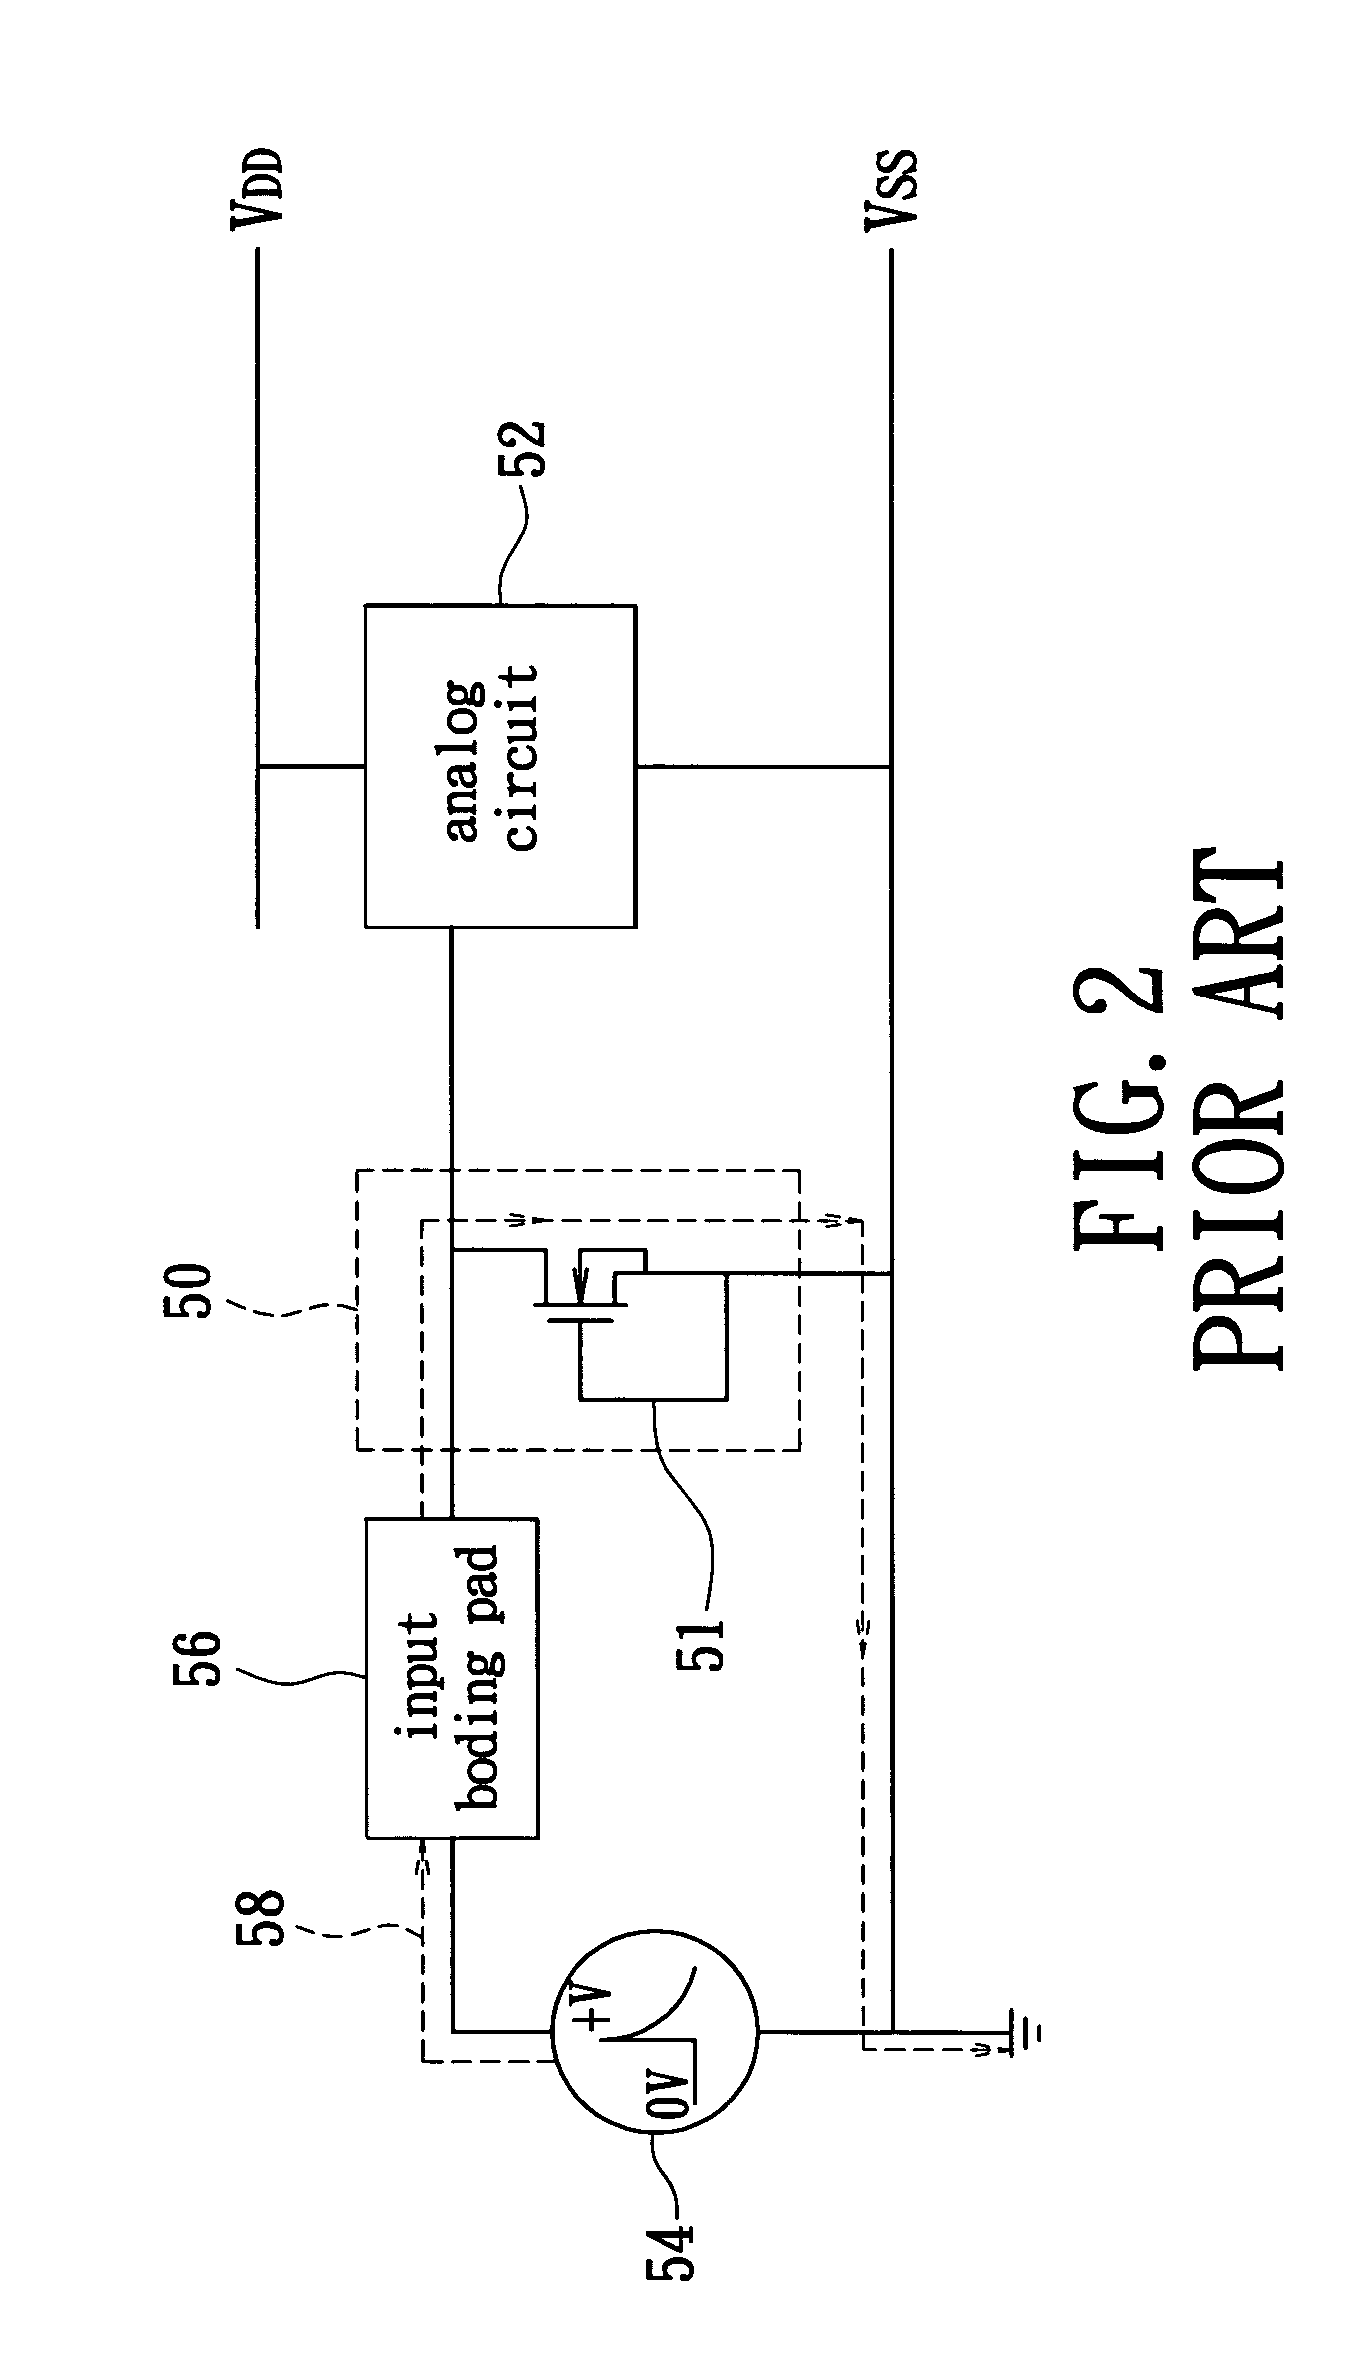 Protection circuit for electro static discharge